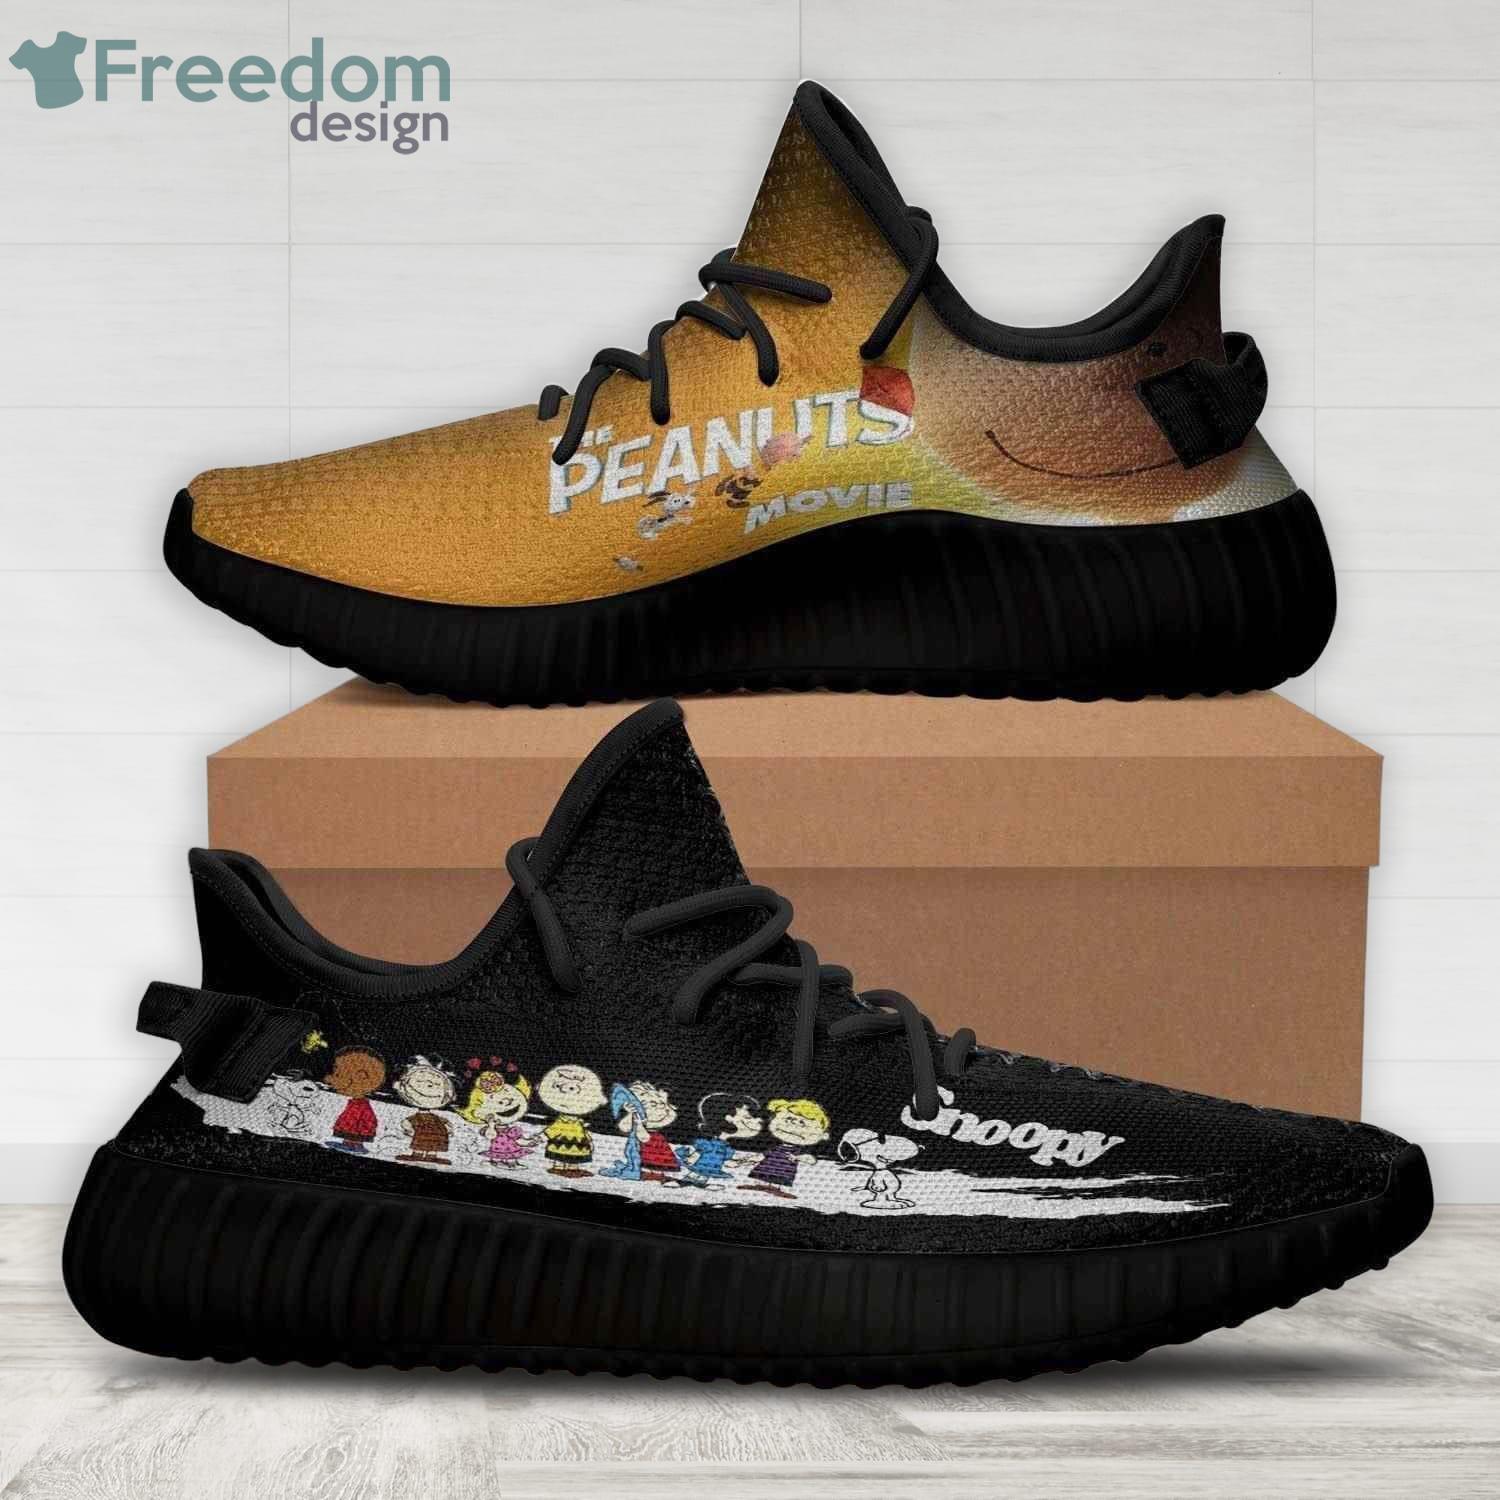 Yeezy Black And Brown Adidas Edition Boost 350 V2 Sneakers for Men